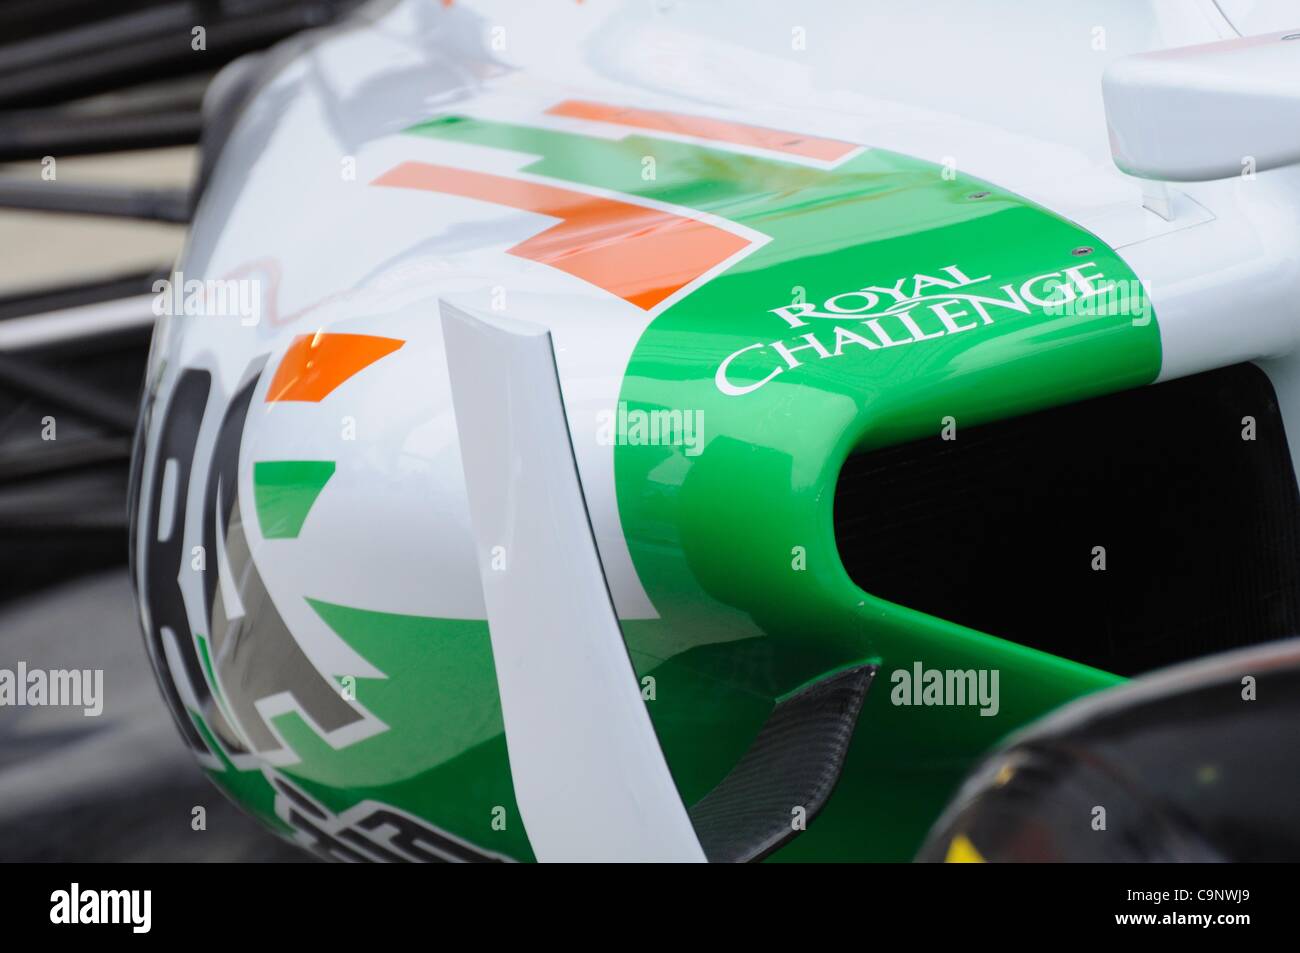 Silverstone, UK. 3rd Feb, 2012. The launch of Force India's 2012 car, the VJM05, at Silverstone Stock Photo